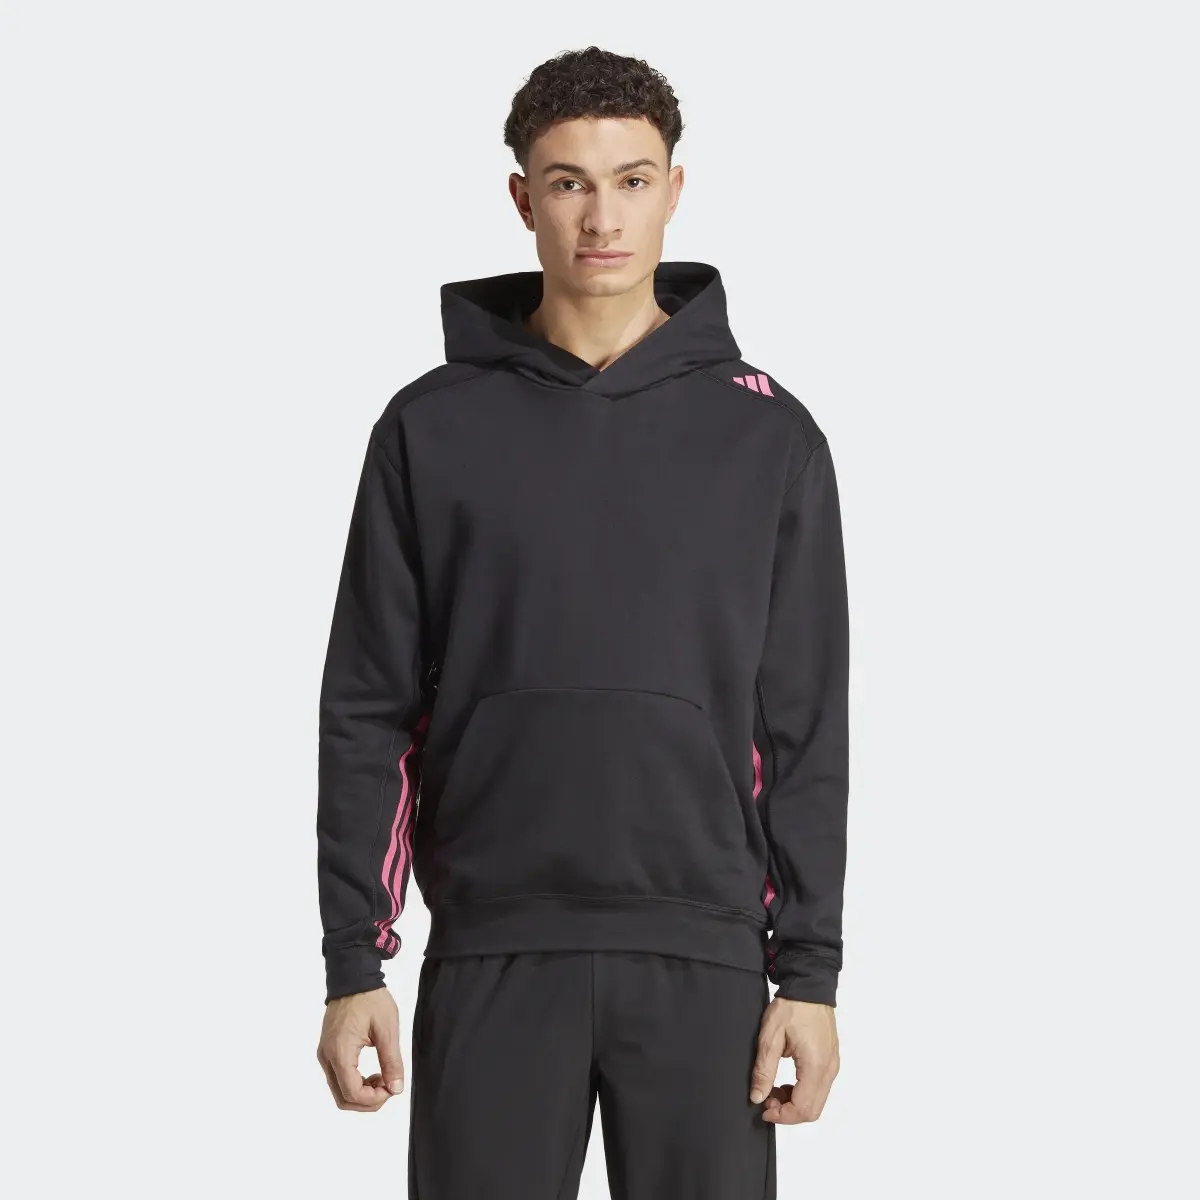 Adidas HIIT Hoodie Curated By Cody Rigsby. 2